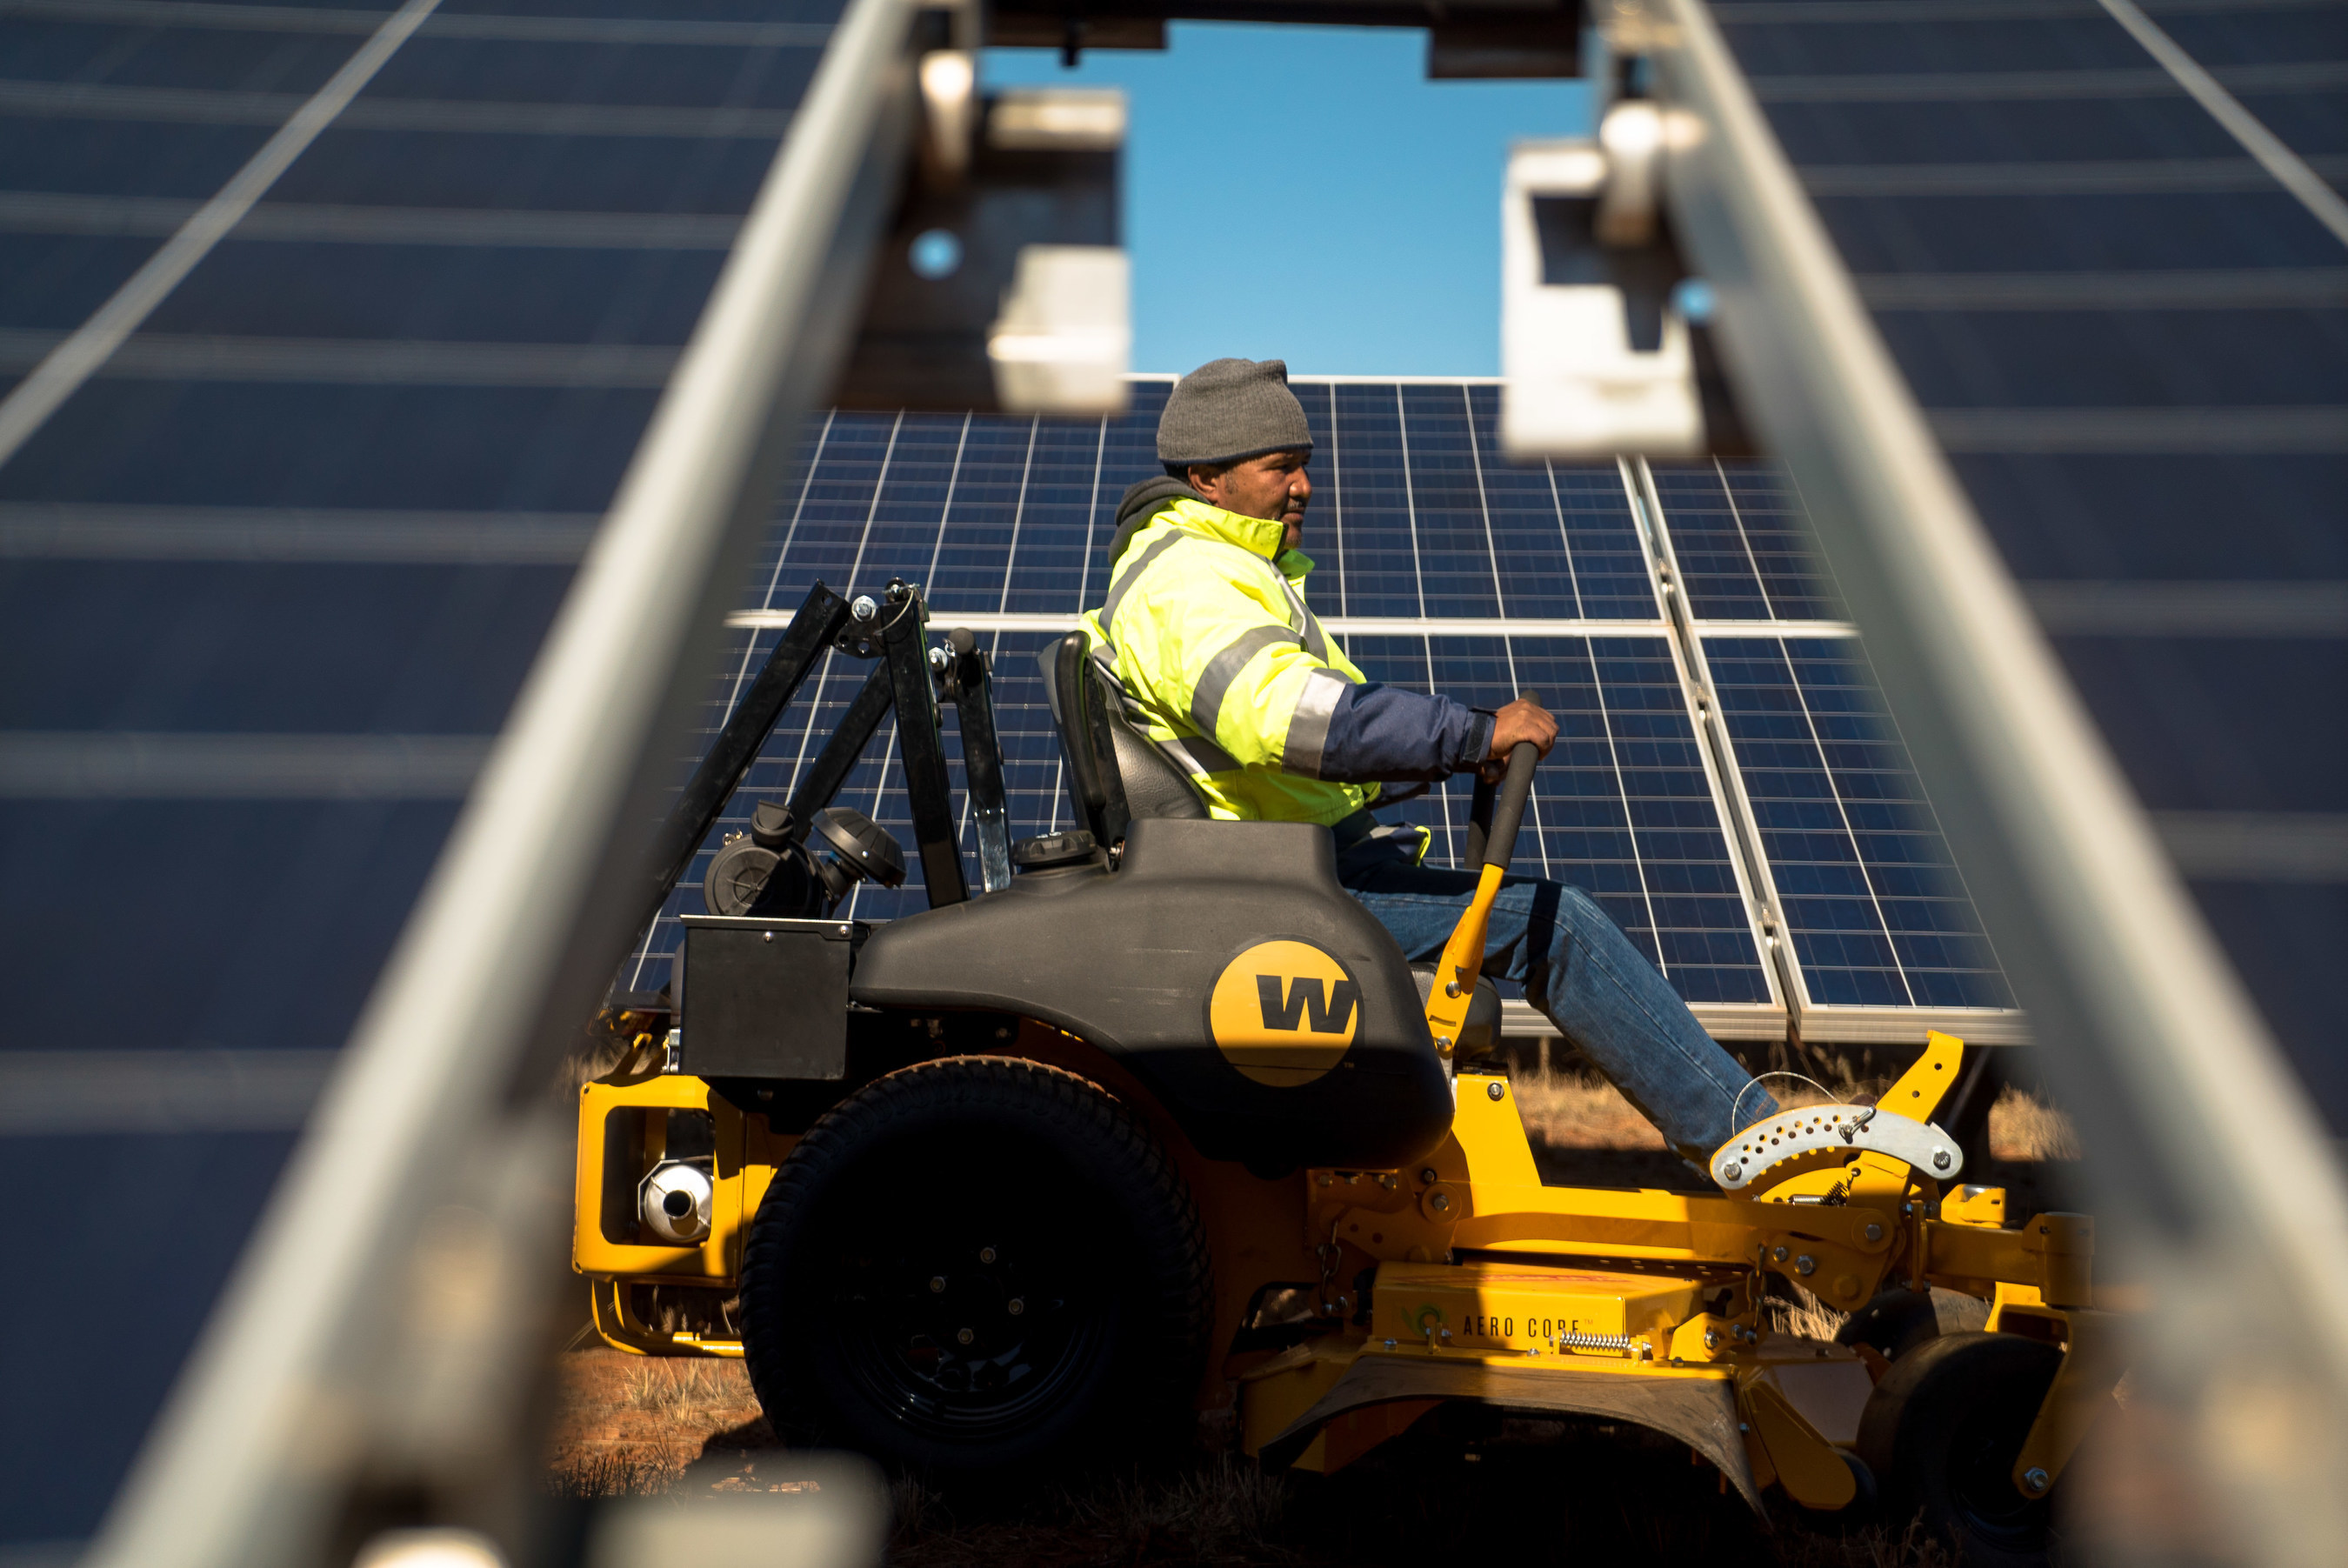 Urban Solar Farms will also stimulate job growth and small business development